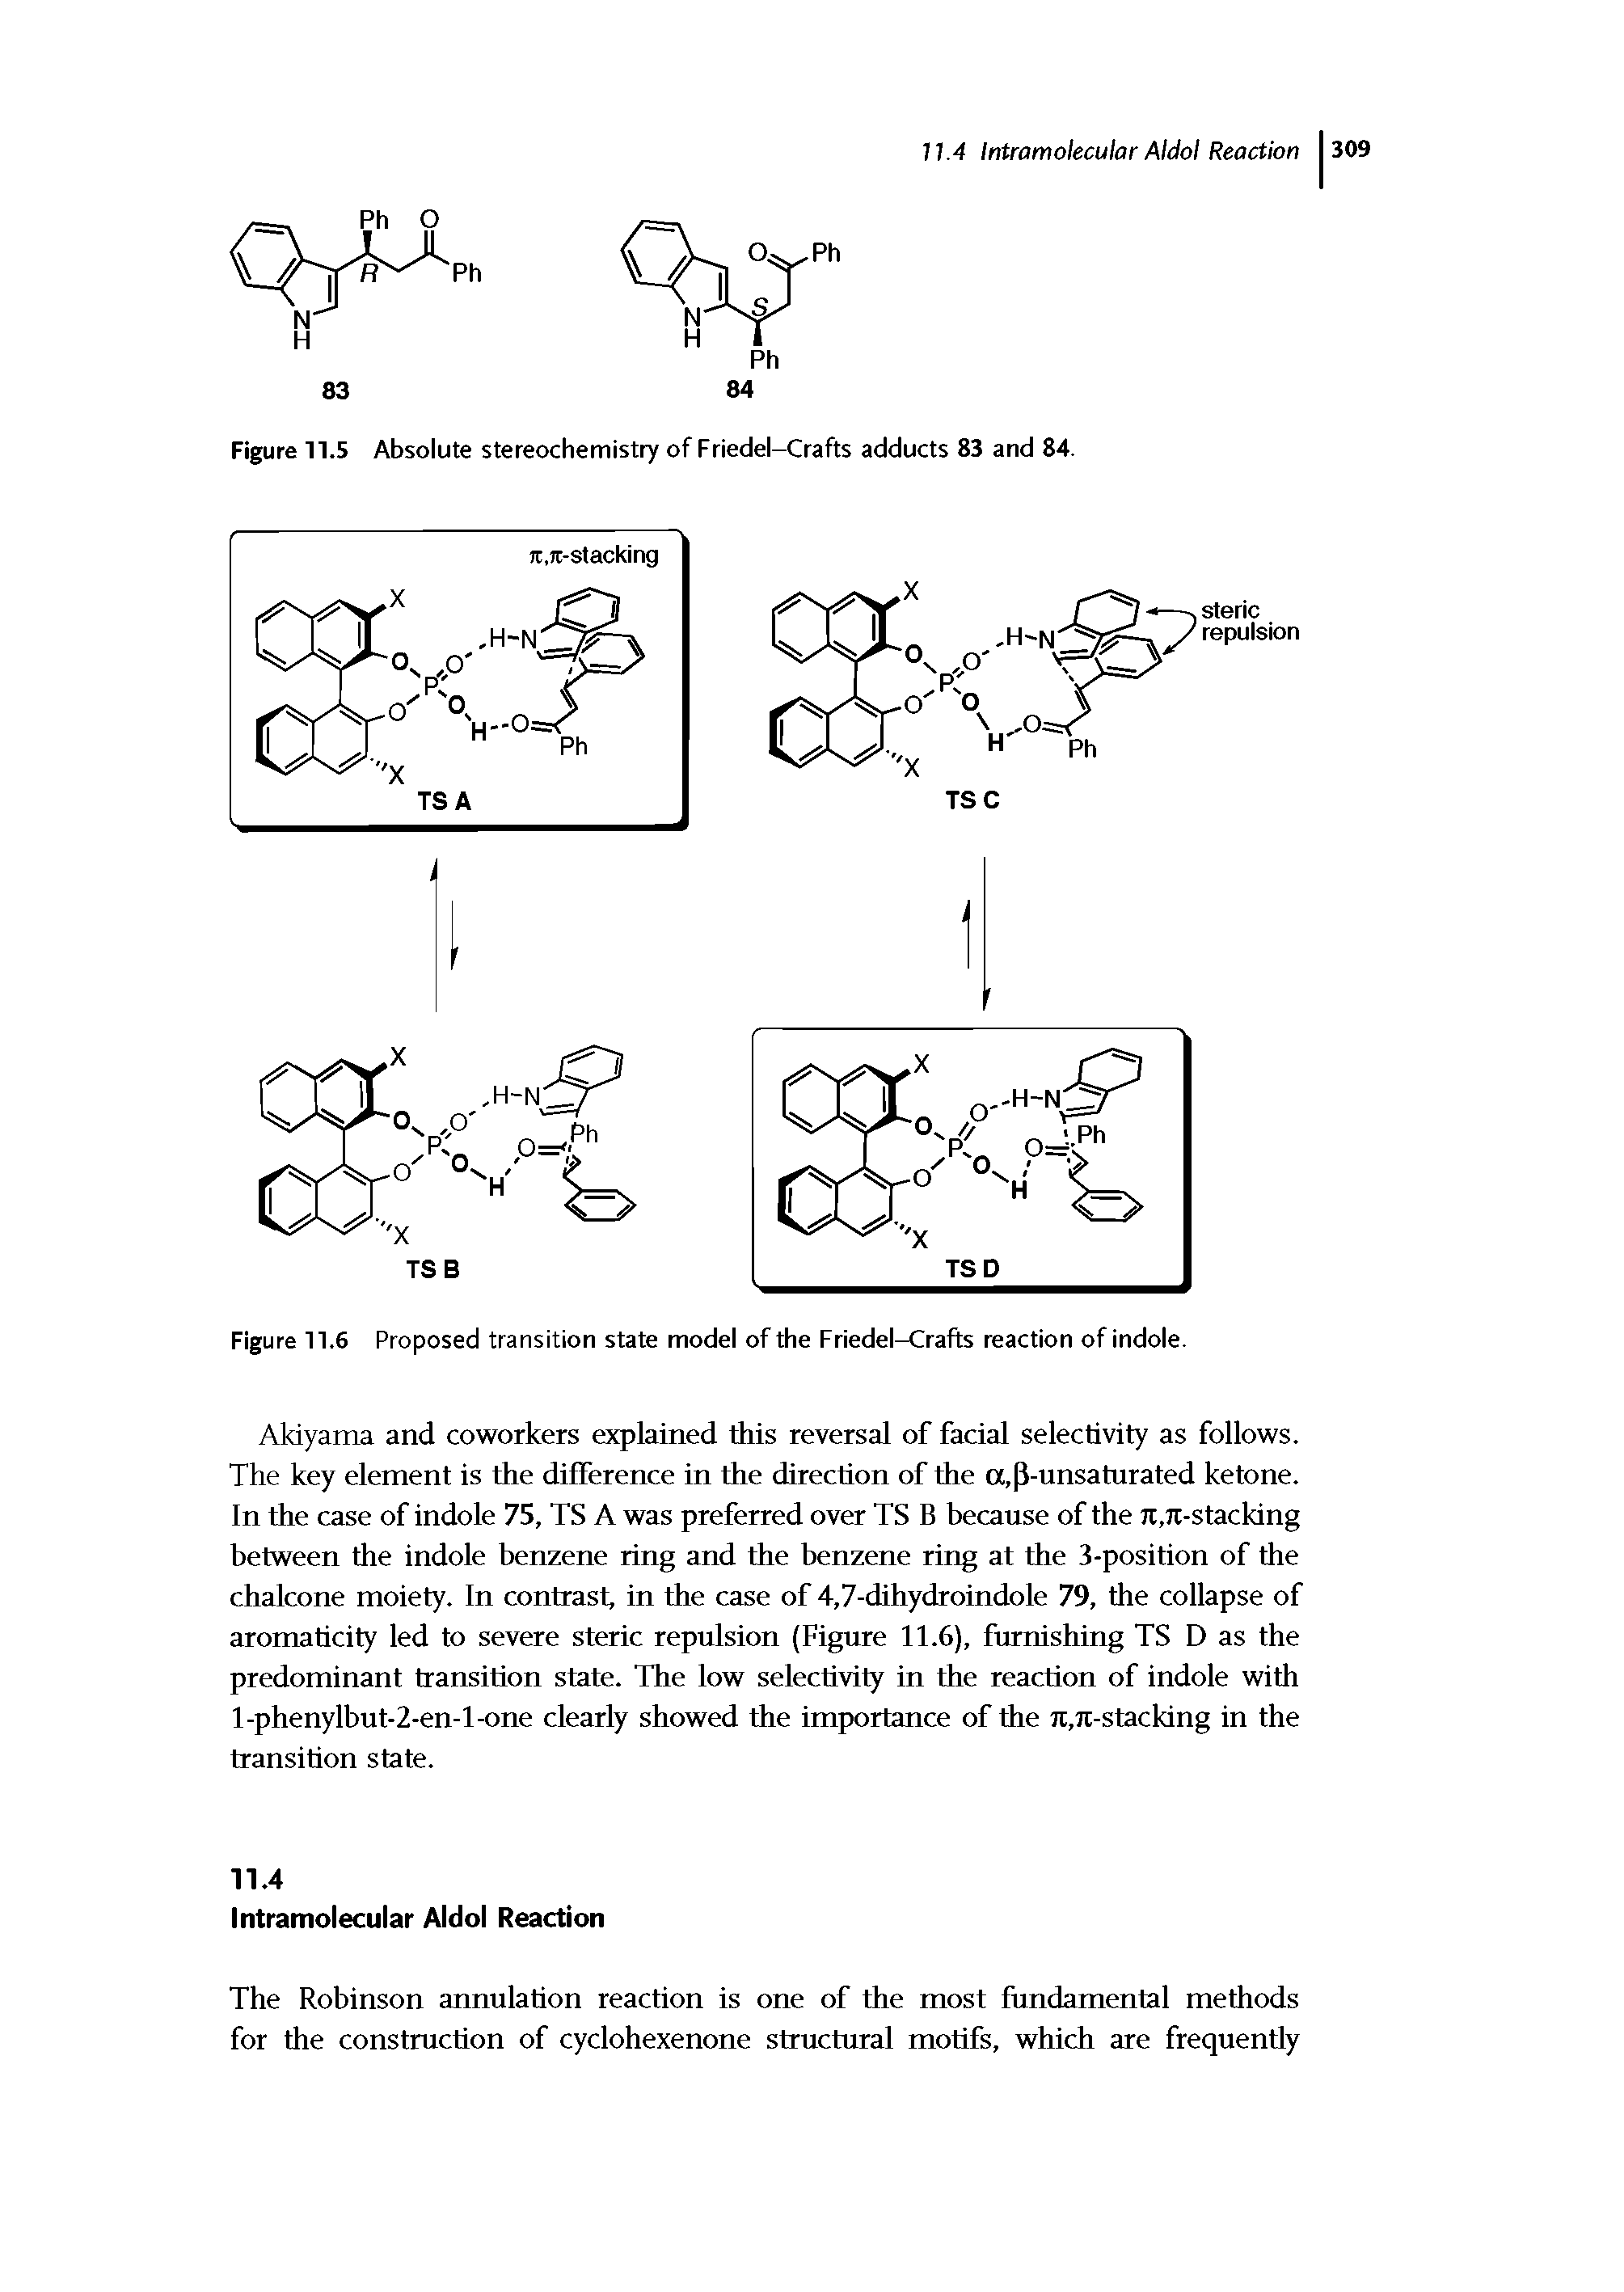 Figure 11.5 Absolute stereochemistry of Friedel-Crafts adducts 83 and 84.